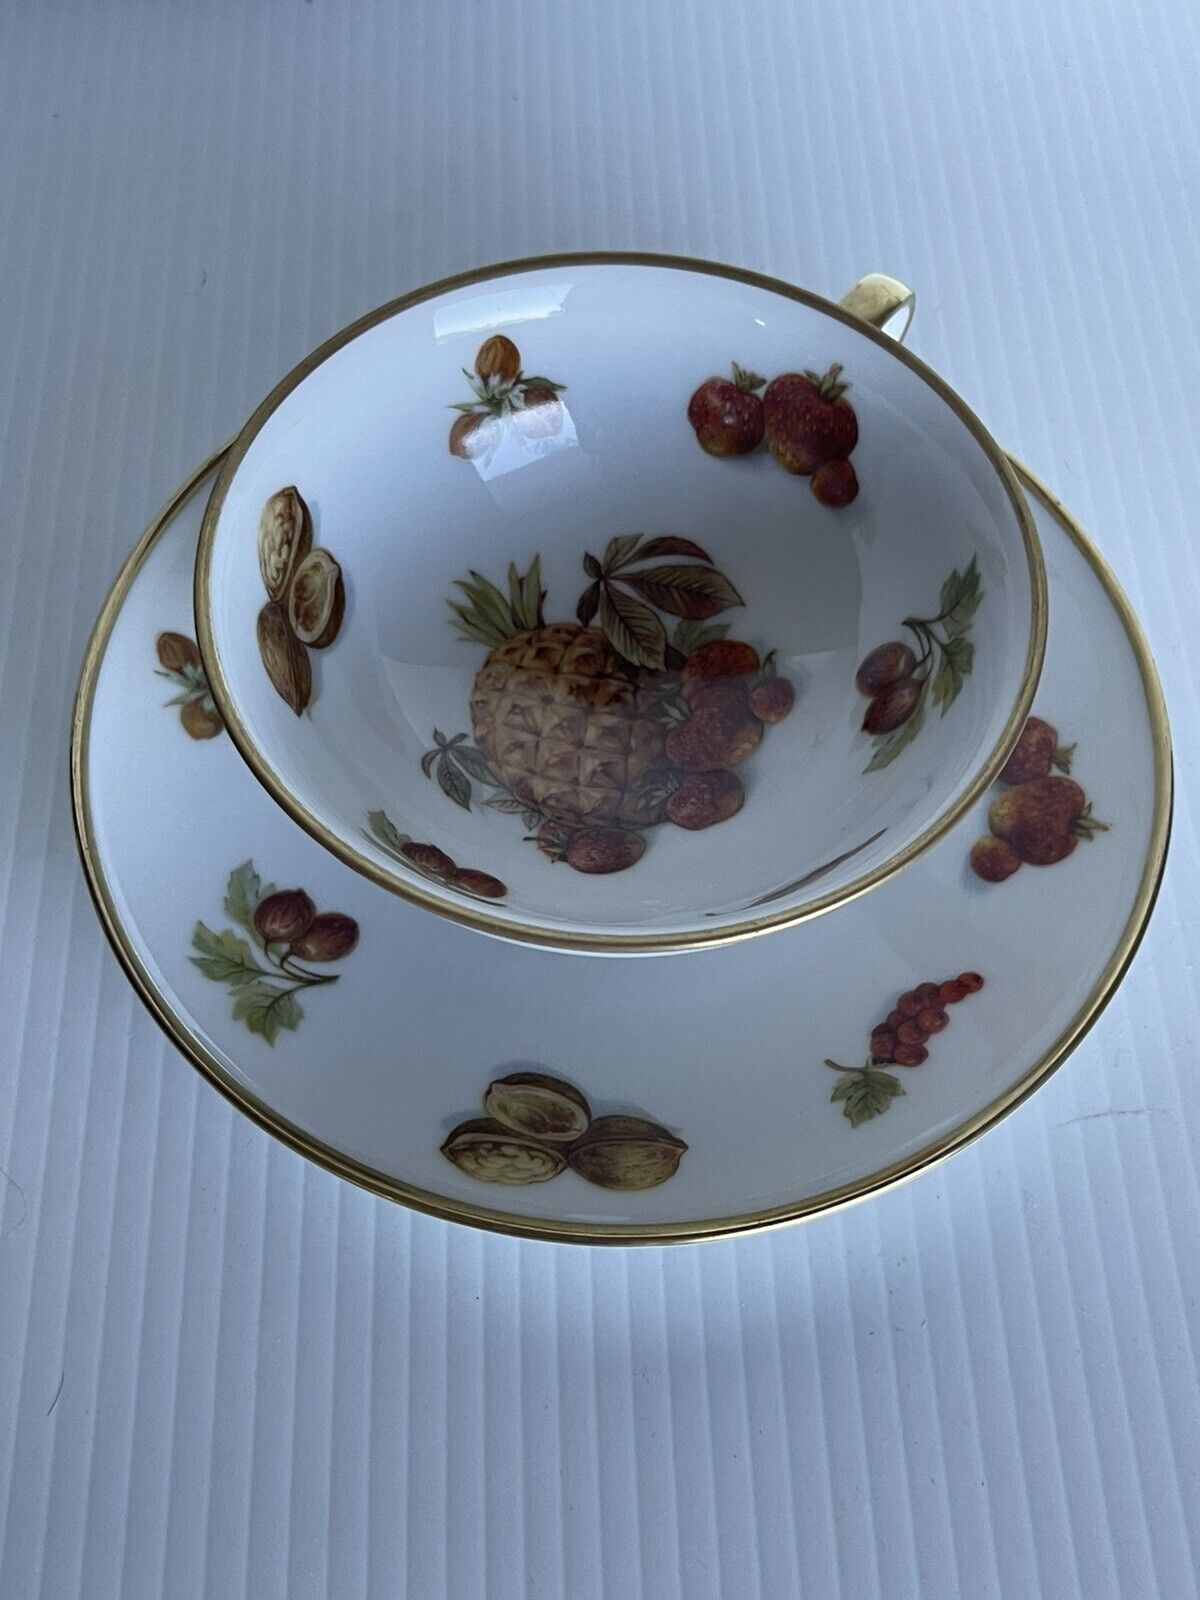 Winterling Four Footed Cup Saucer Fruit Nuts Gold Trim Bavaria Germany RARE #44